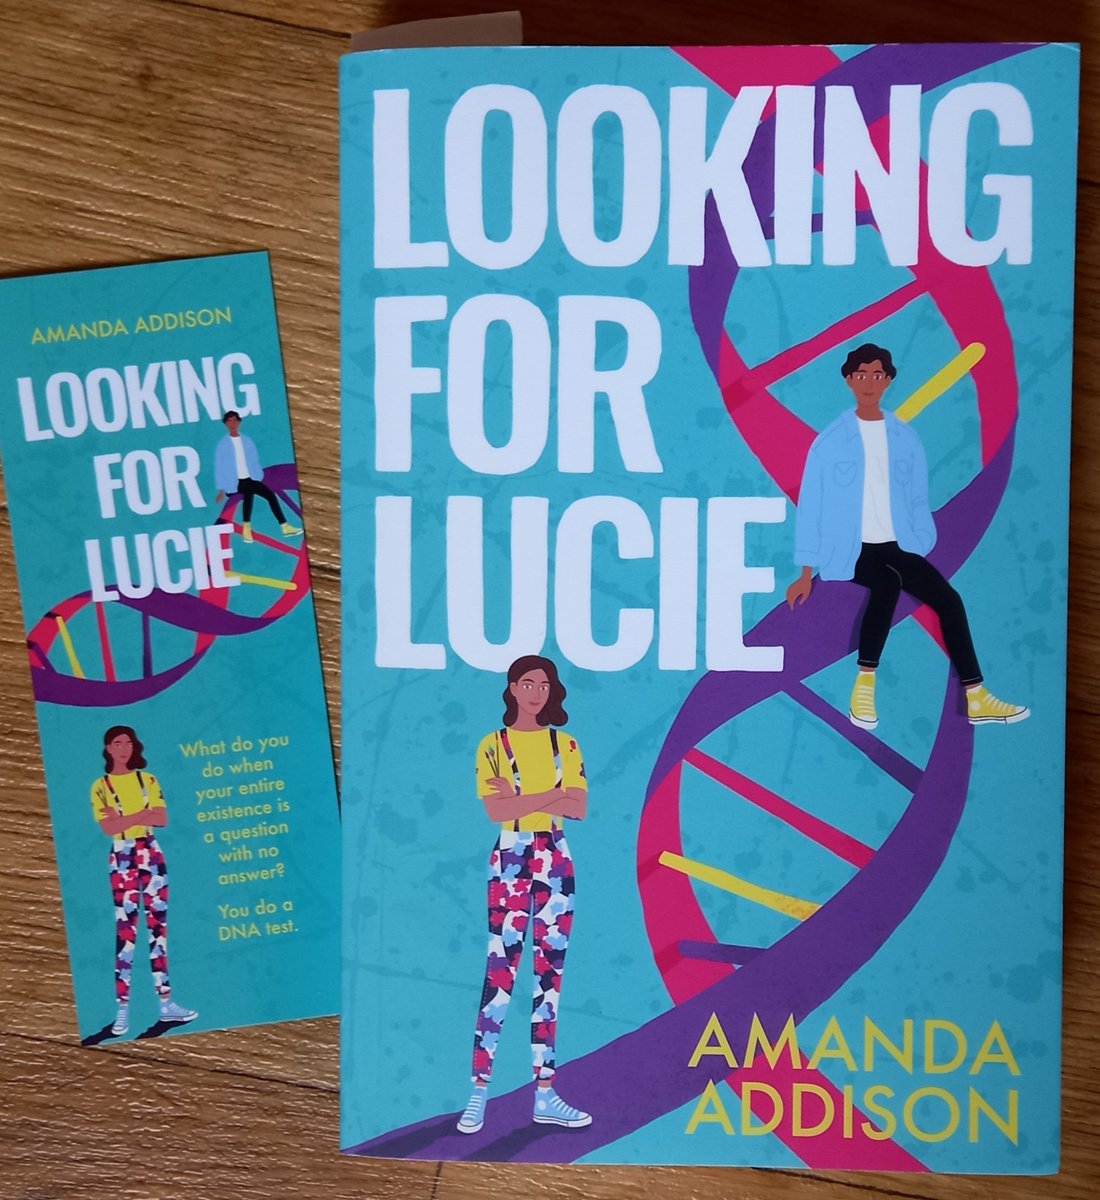 I've left some signed copies and bookmarks of Looking for Lucie @NeemTreePress @NorwichStones if you're looking for a thought provoking weekend read!